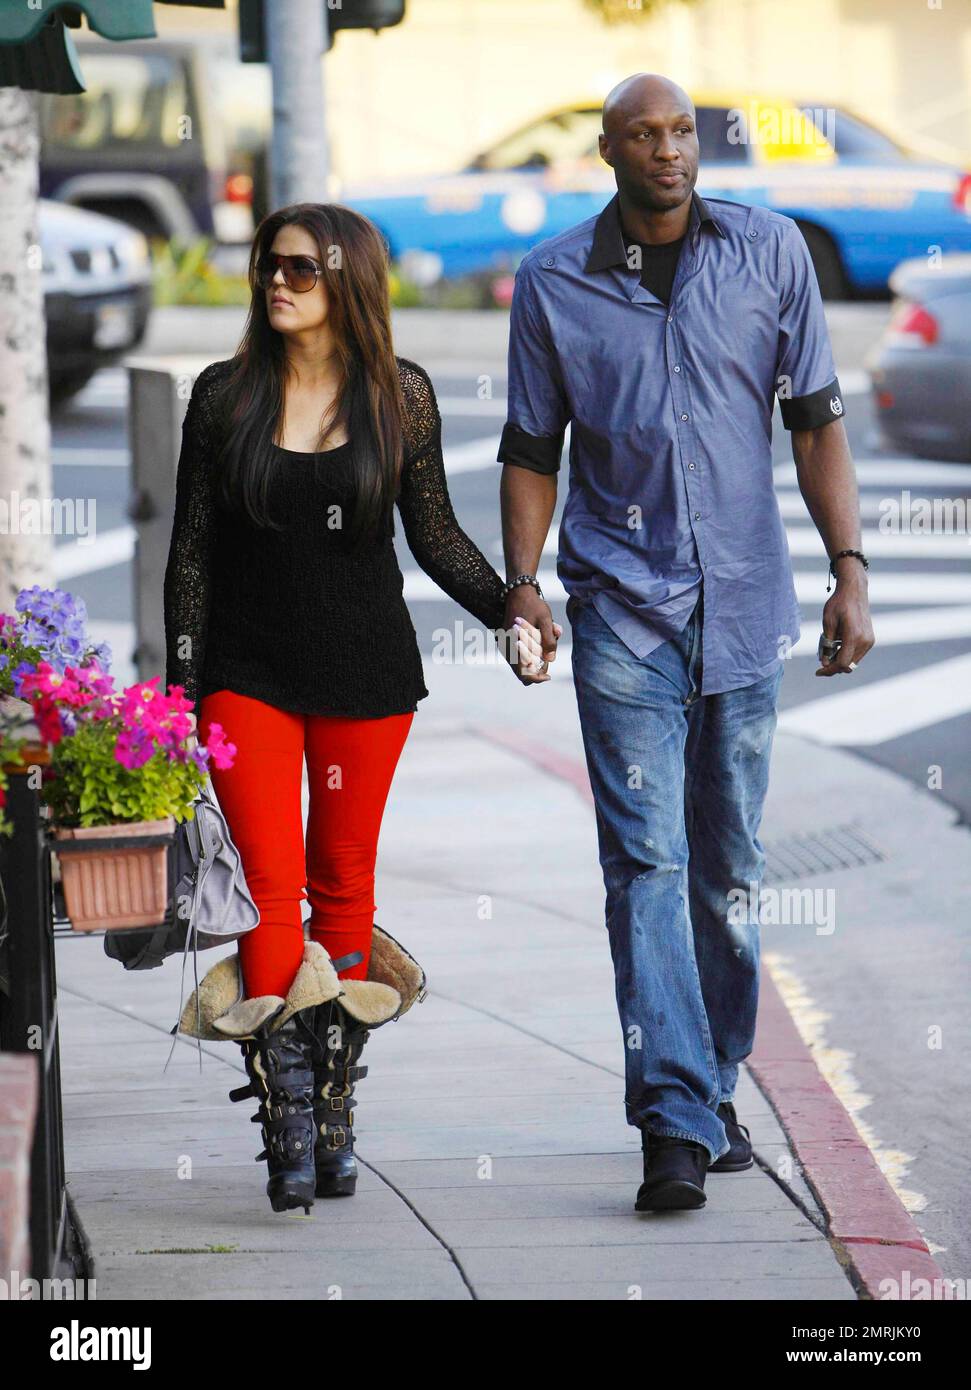 In a pair of bright red leggings, a black crochet top and fuzzy-lined high heel platform buckle-detailed boots reality TV star Khloe Kardashian holds hands with husband, LA Lakers basketball player Lamar Odom, as they stroll down the street.  The couple's new E! Network reality show 'Khloe & Lamar' premieres on April 10th and Khloe recently said of the premiere, 'I can't believe the premiere is less than a month away - so excited and so nervous! I'm dying with anticipation.' Los Angeles, CA. 03/15/11. Stock Photo